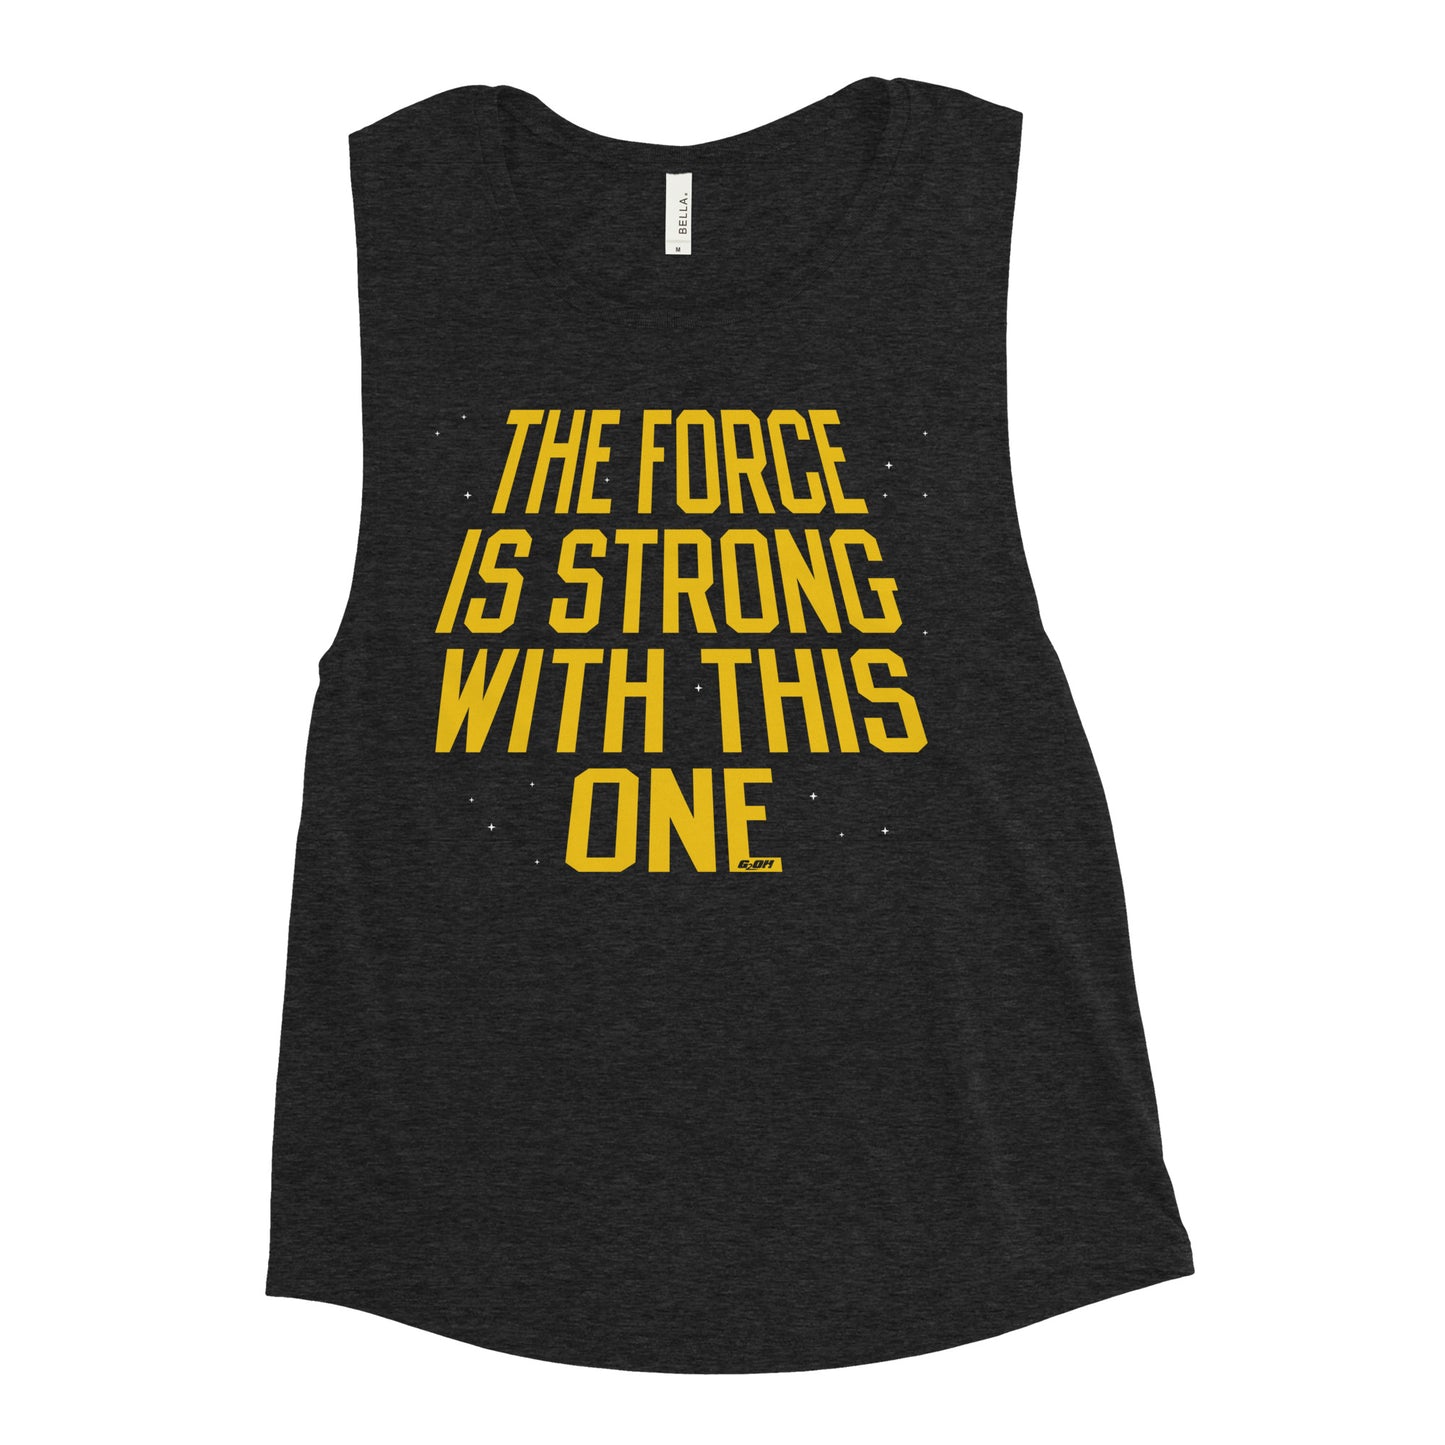 The Force Is Strong Women's Muscle Tank